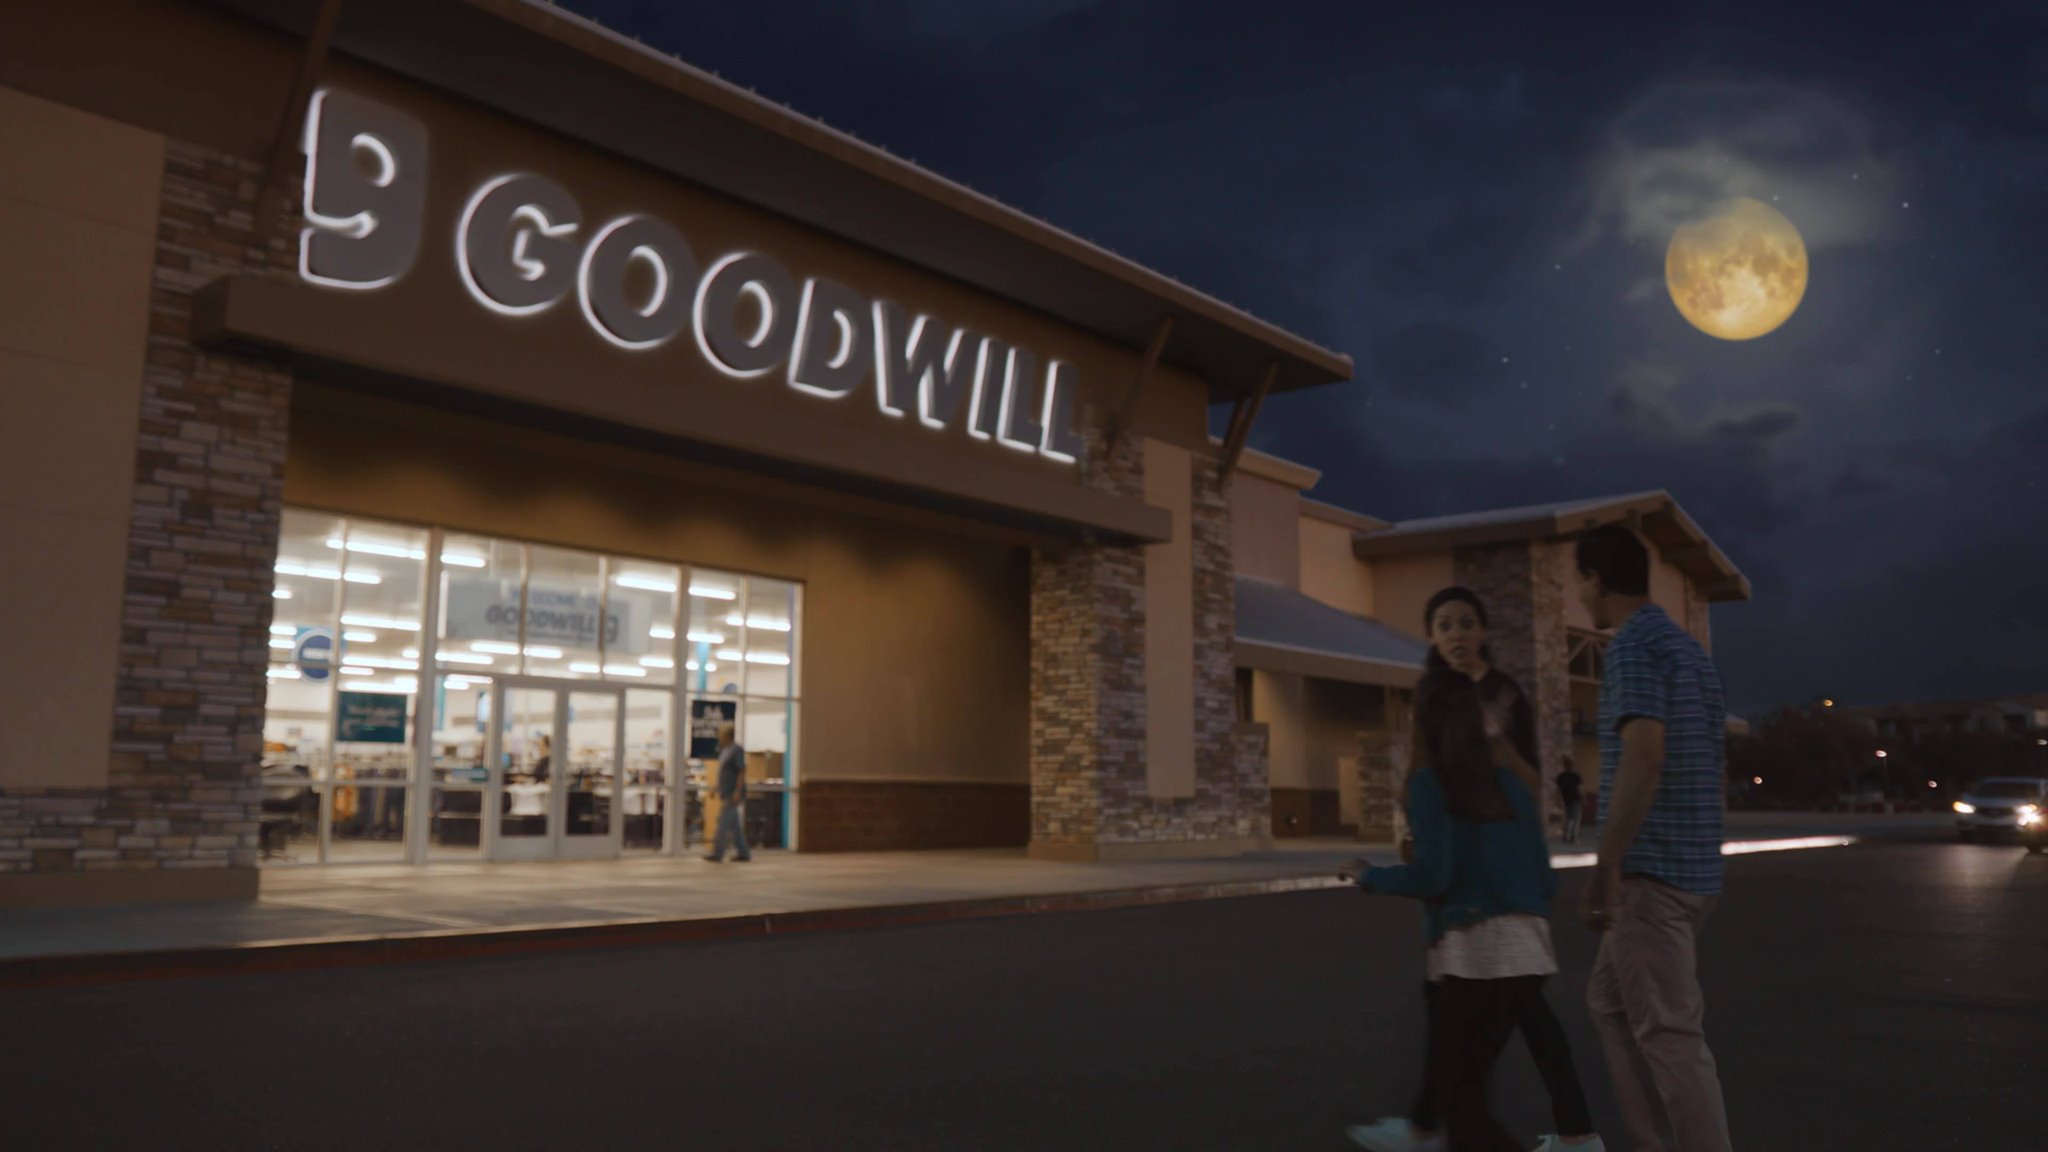 Apache Trail Goodwill Retail Store and Donation Center